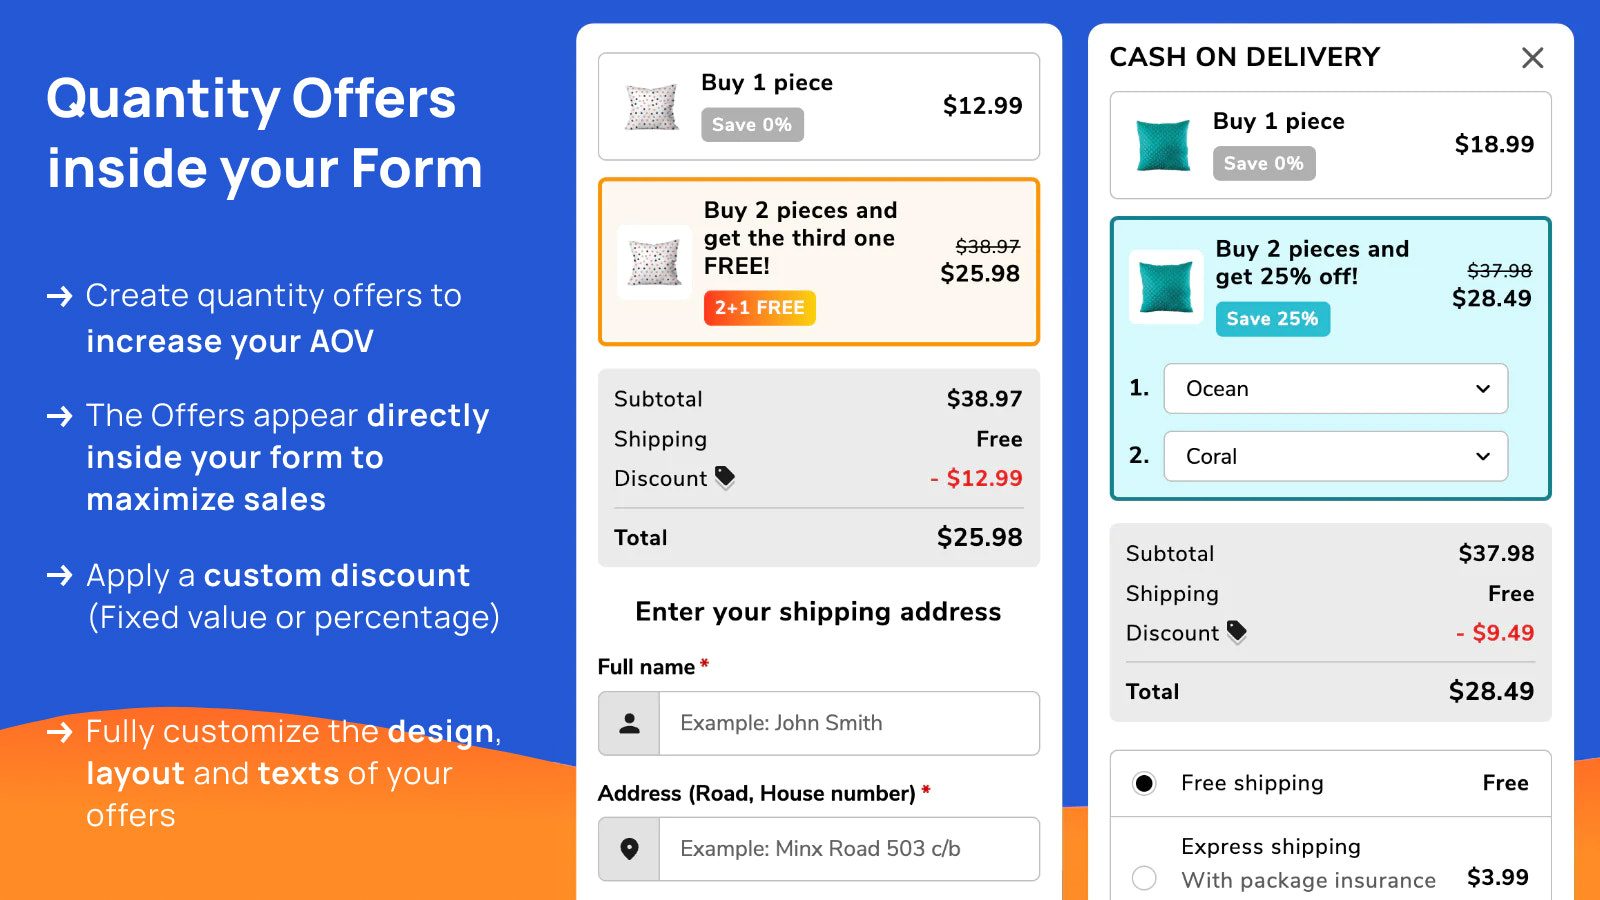 Quantity offers inside the form